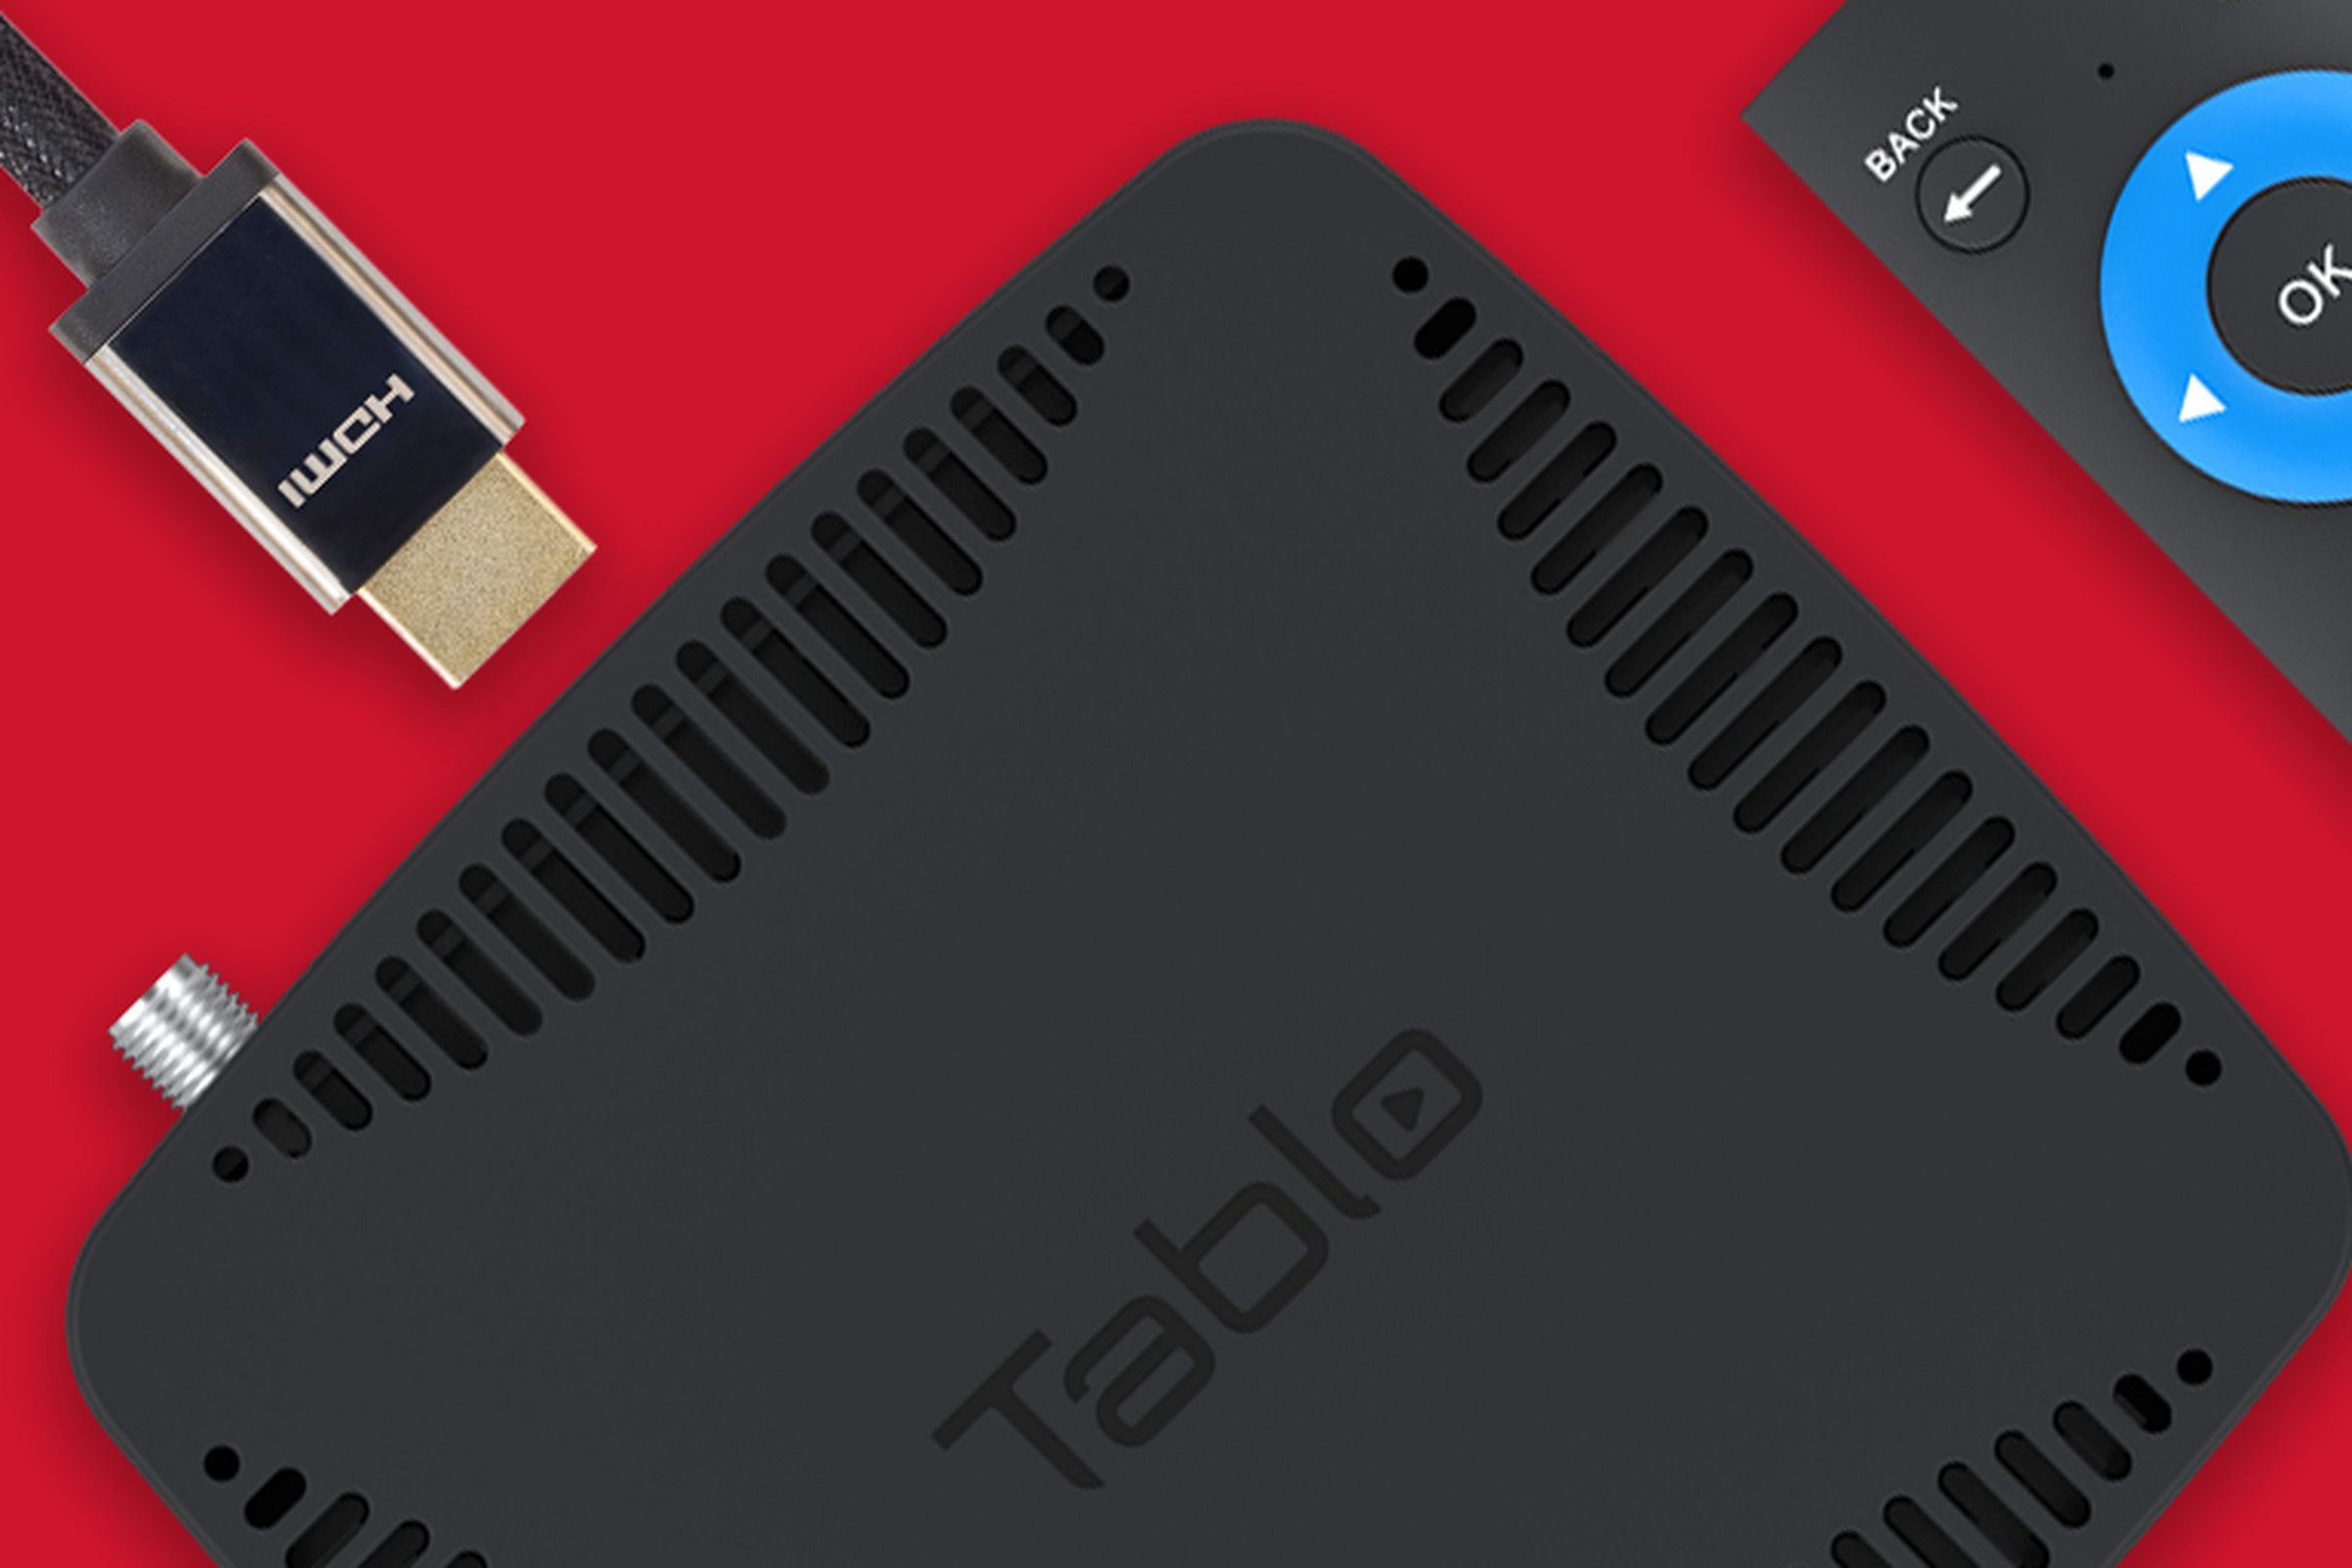 This new Tablo box is built to grab TV from the air and record it.